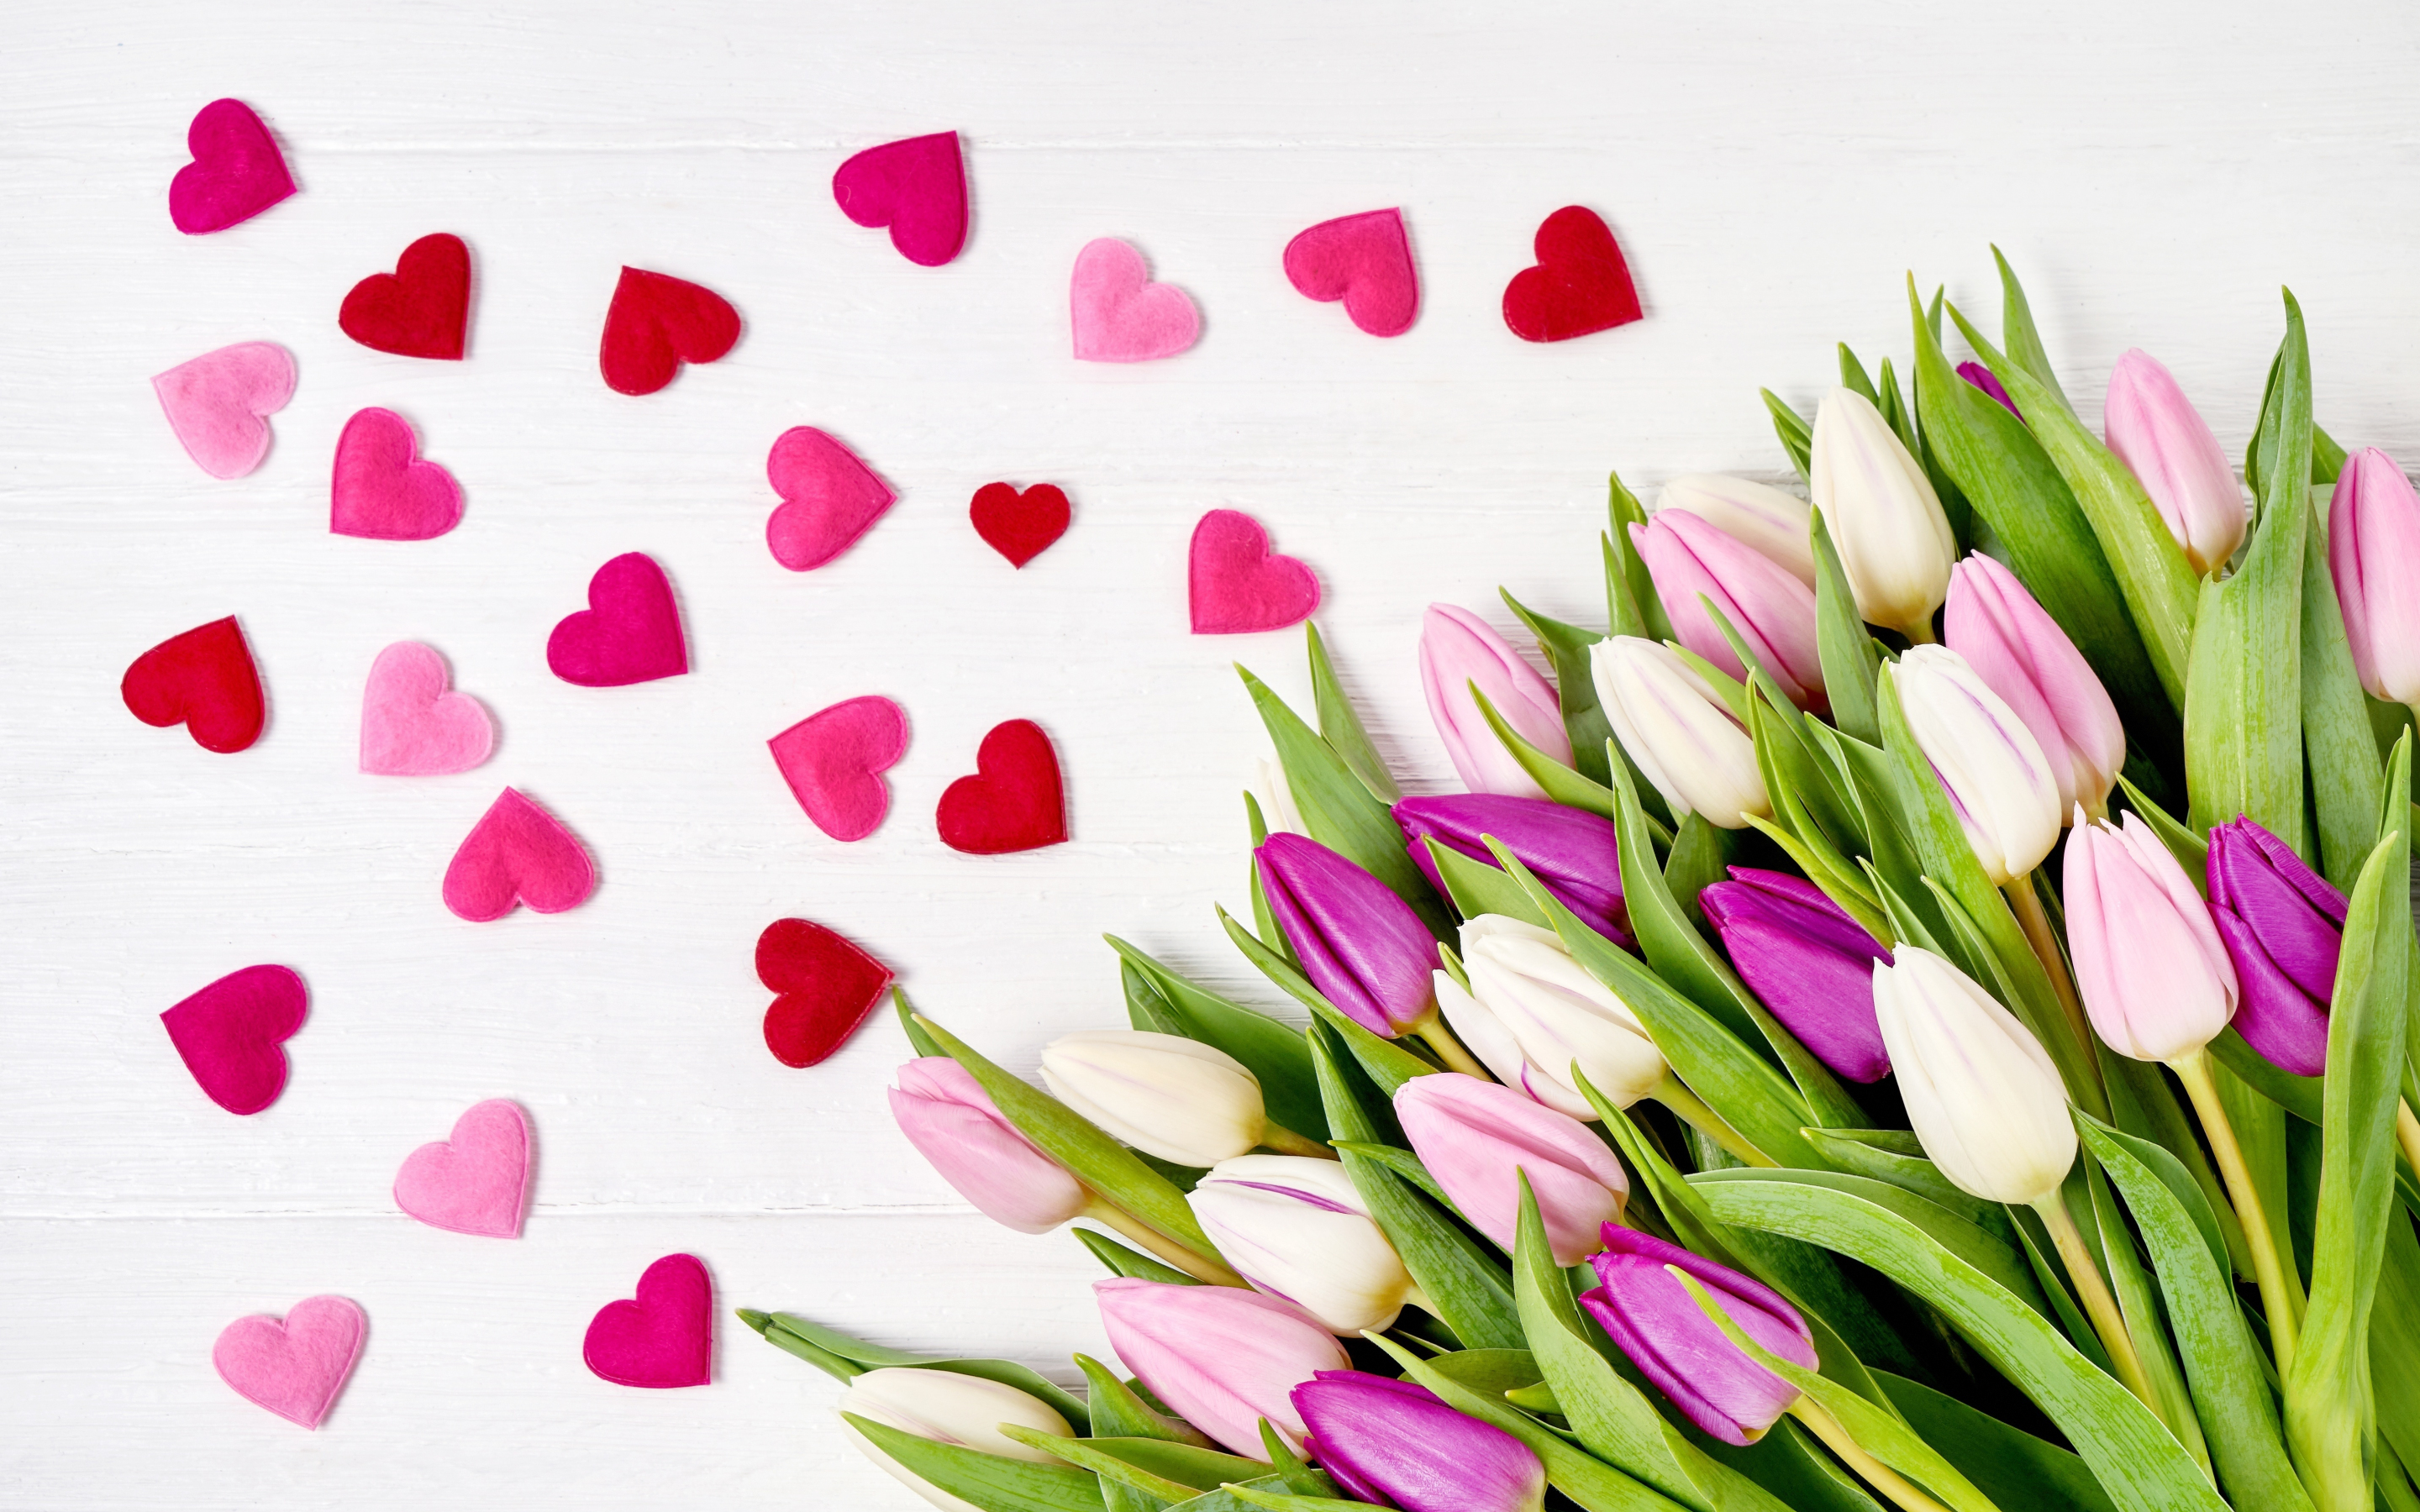 Heart, shapes, flowers, pink tulips, 2880x1800 wallpaper